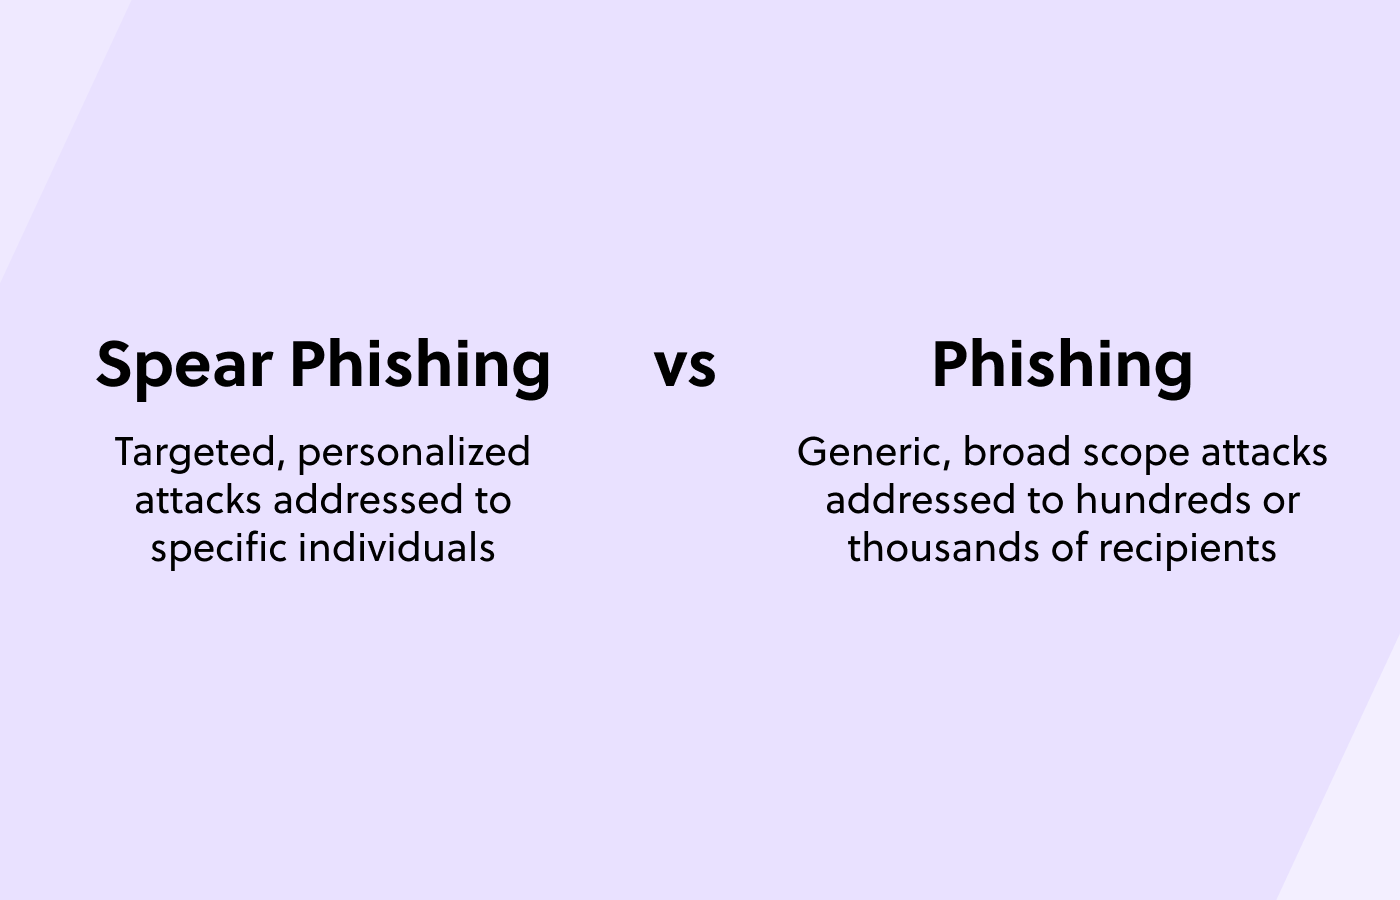 comparison of spear phishing and phishing